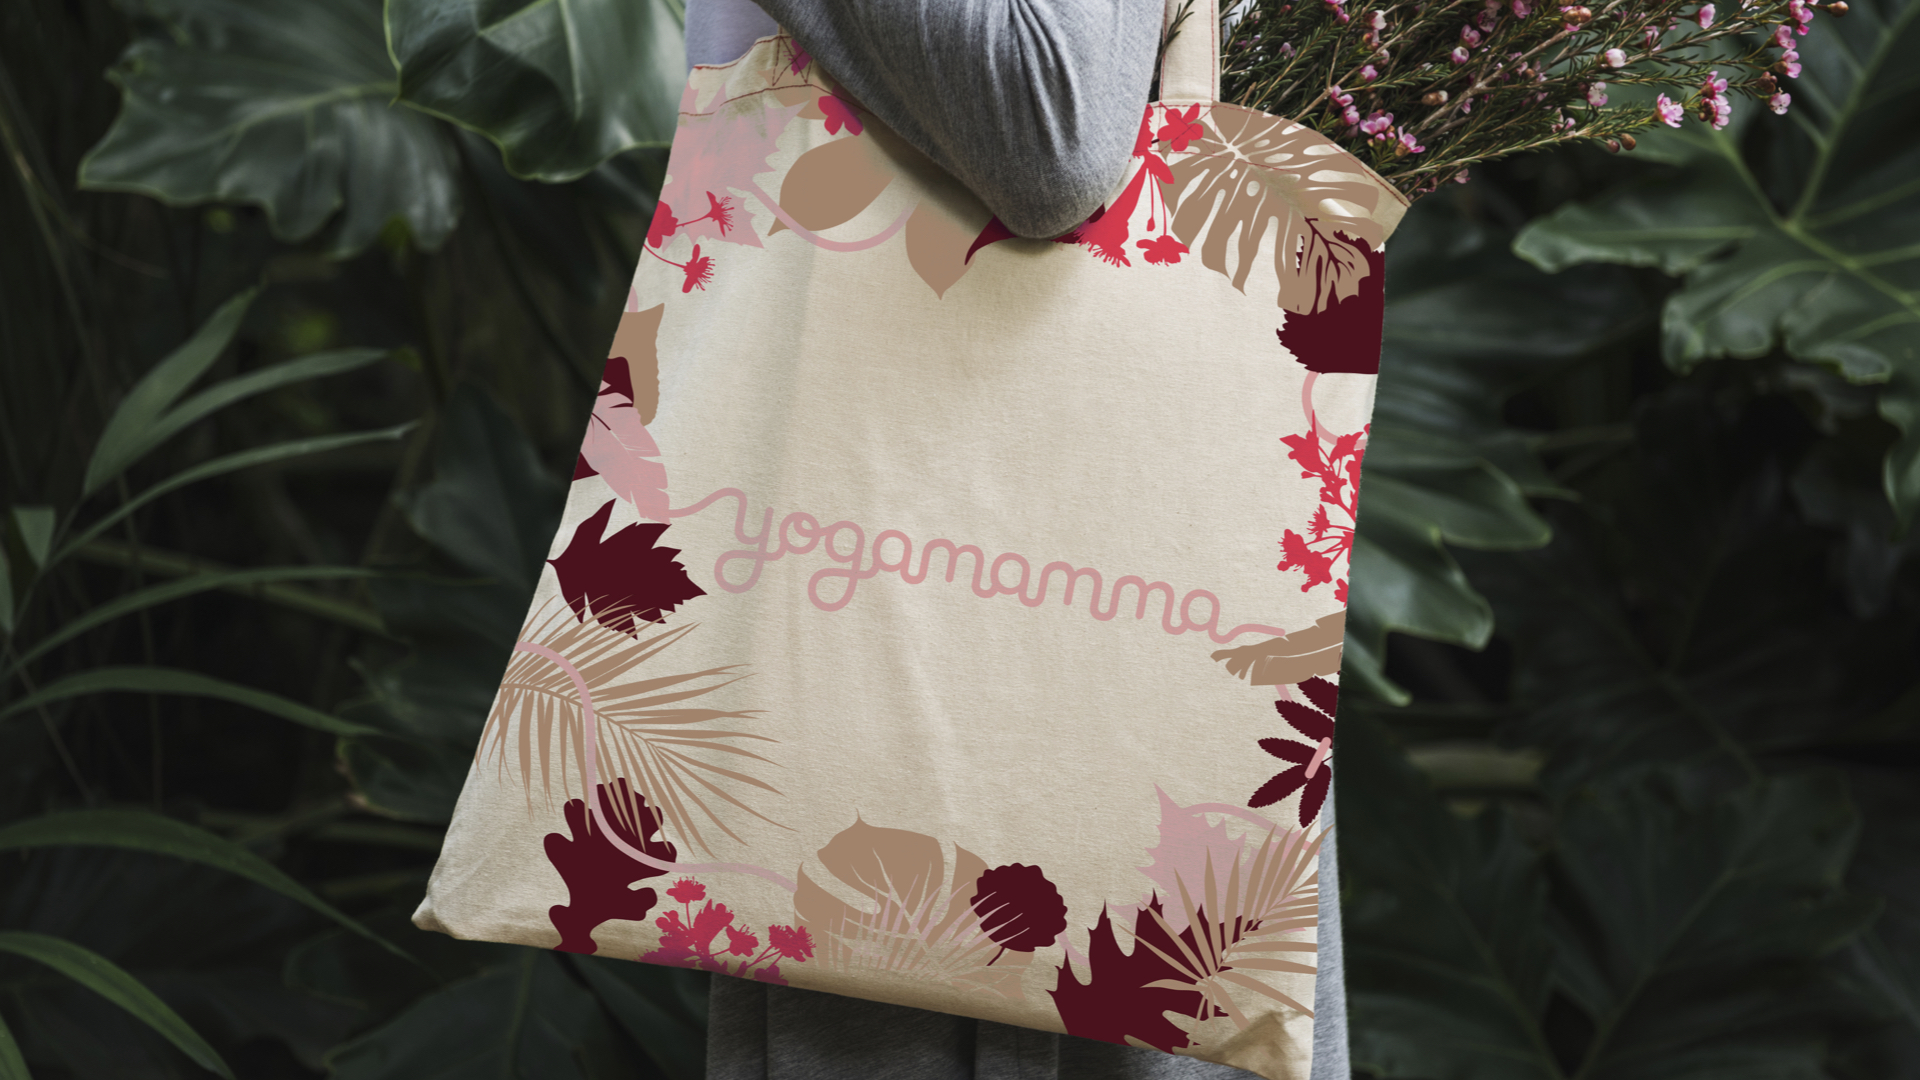  Tote bag for Yogamamma 